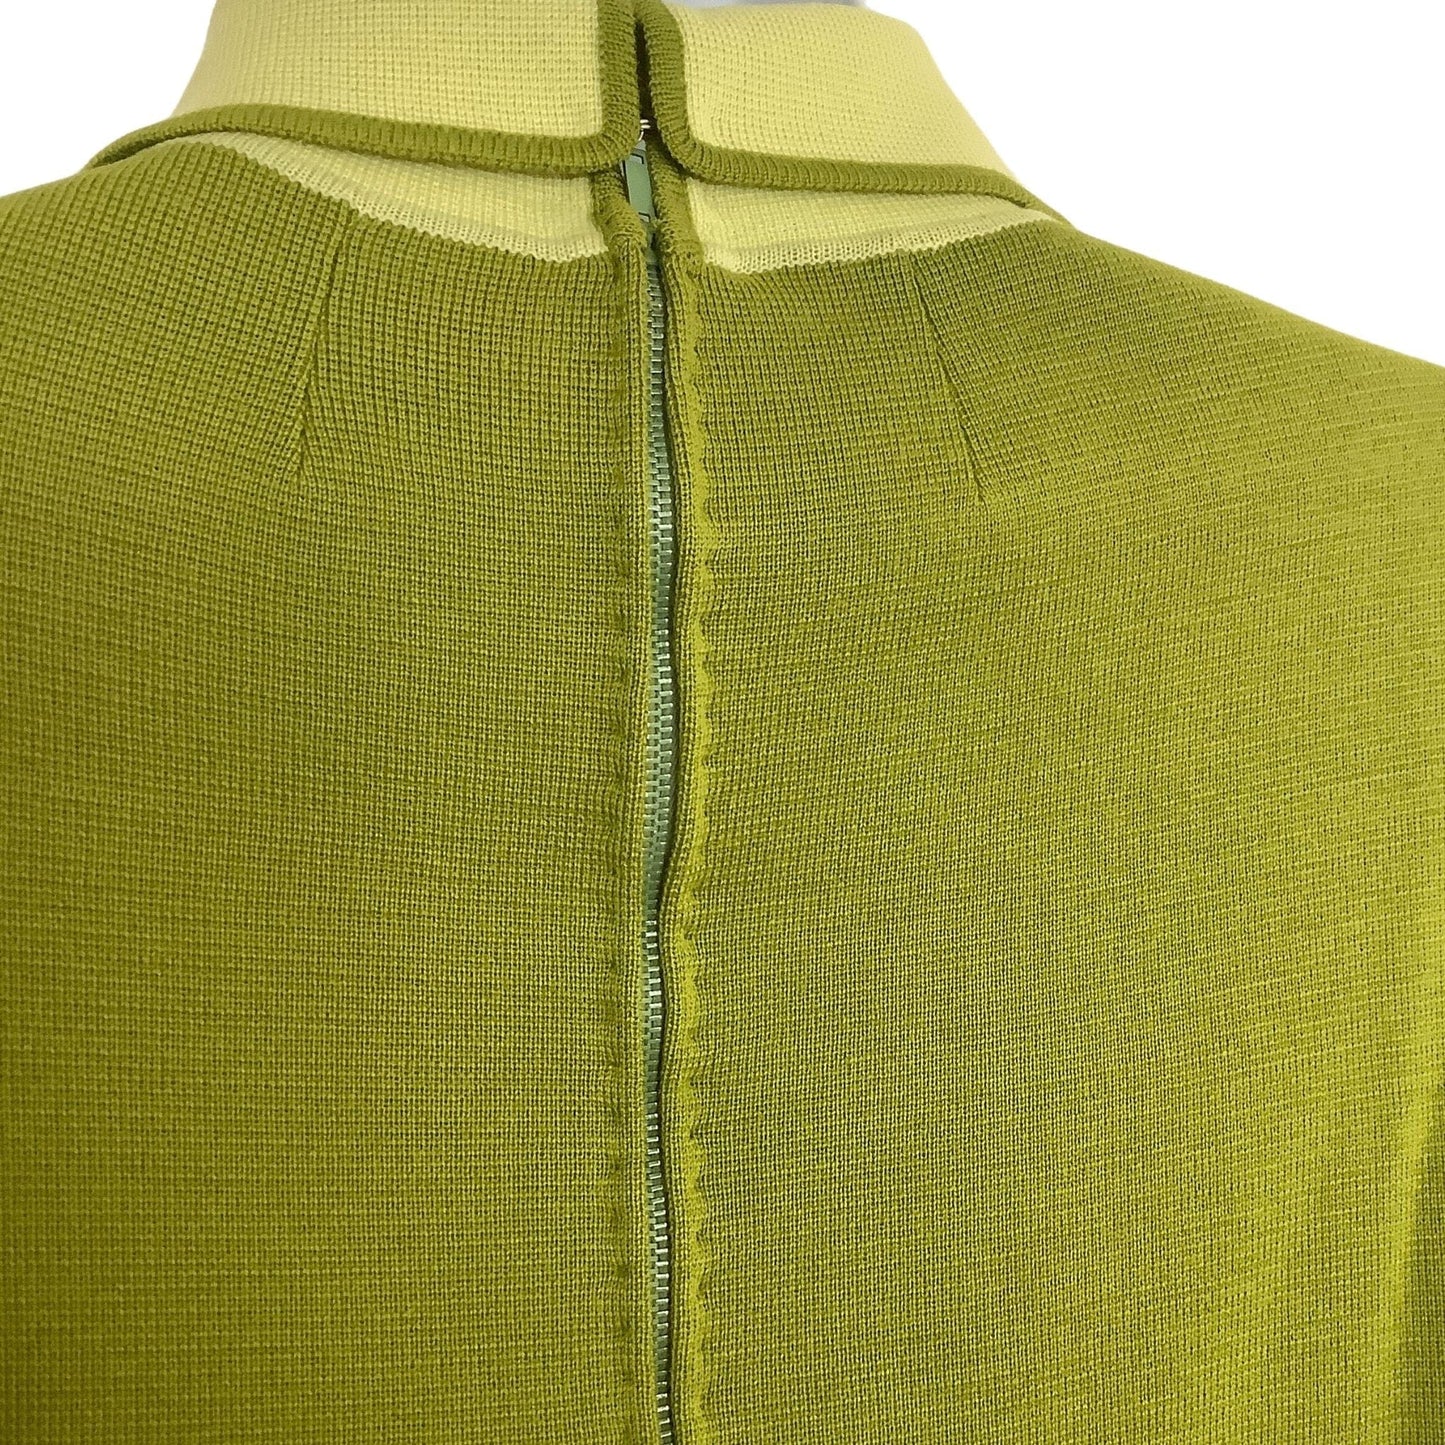 Vintage Green Knit Dress Small / Green / Vintage 1960s